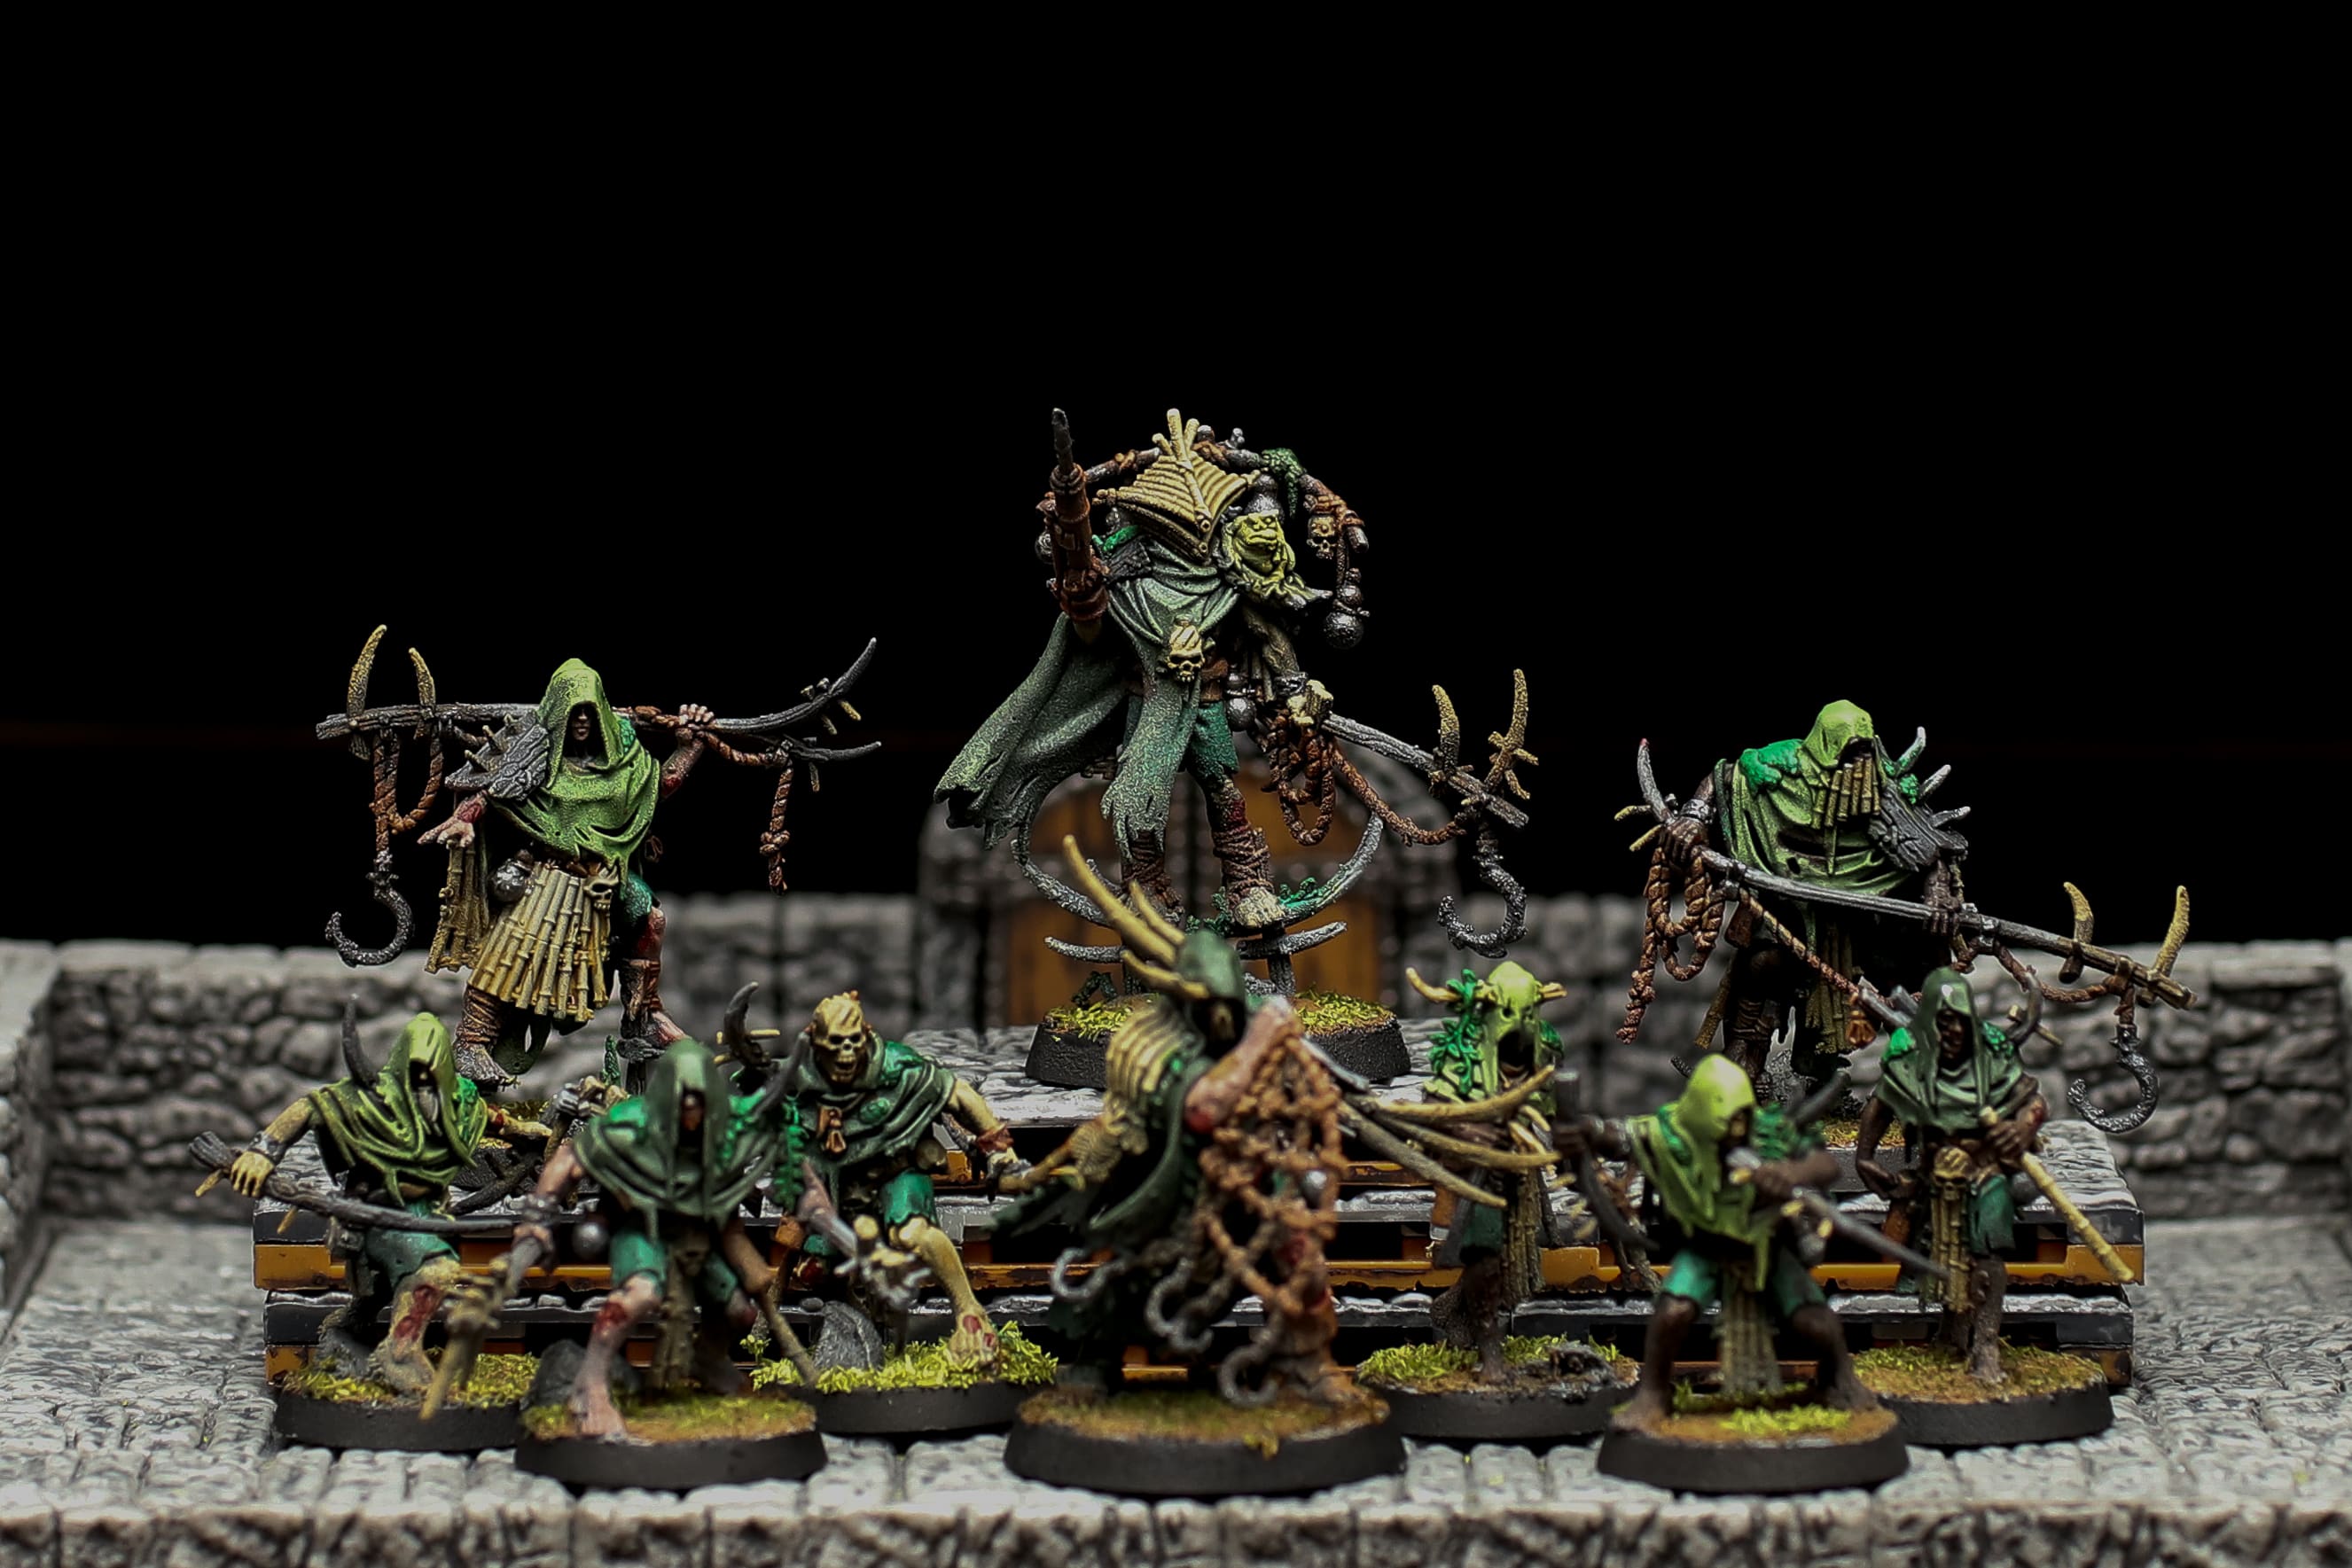 paint a full, custom warhammer aos warcry warband for you